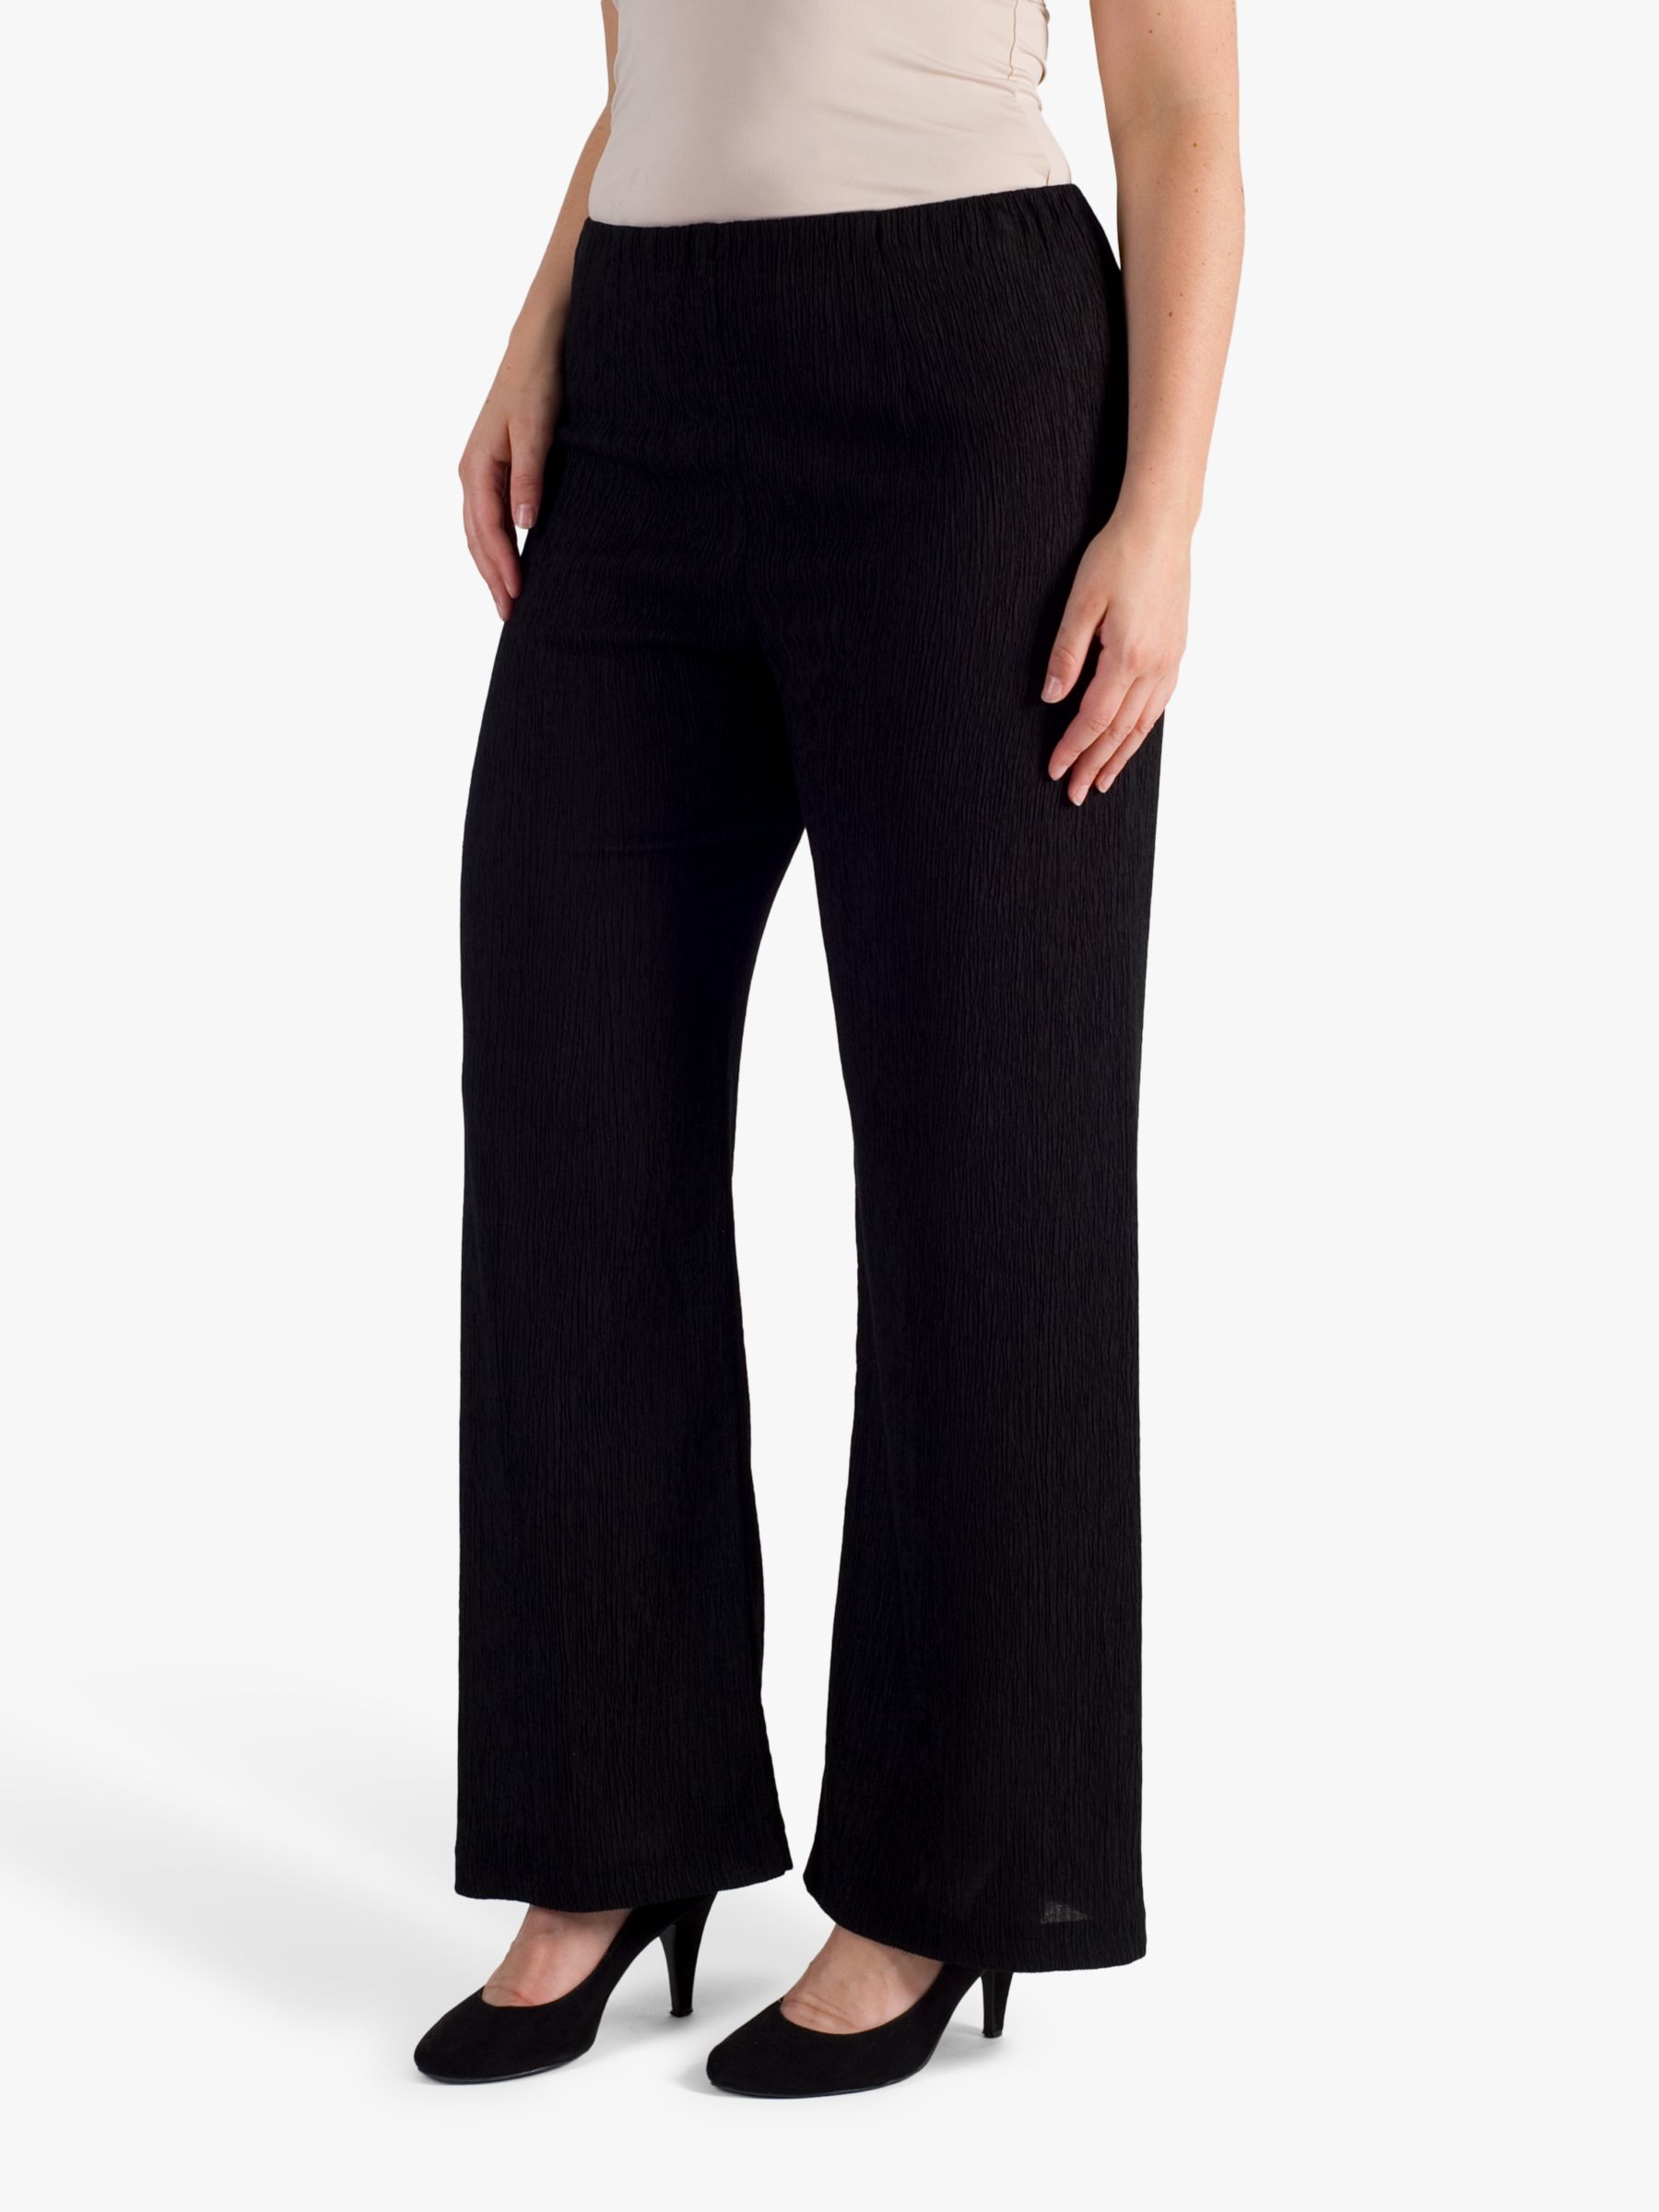 chesca Textured Crinkle Trousers, Black at John Lewis & Partners